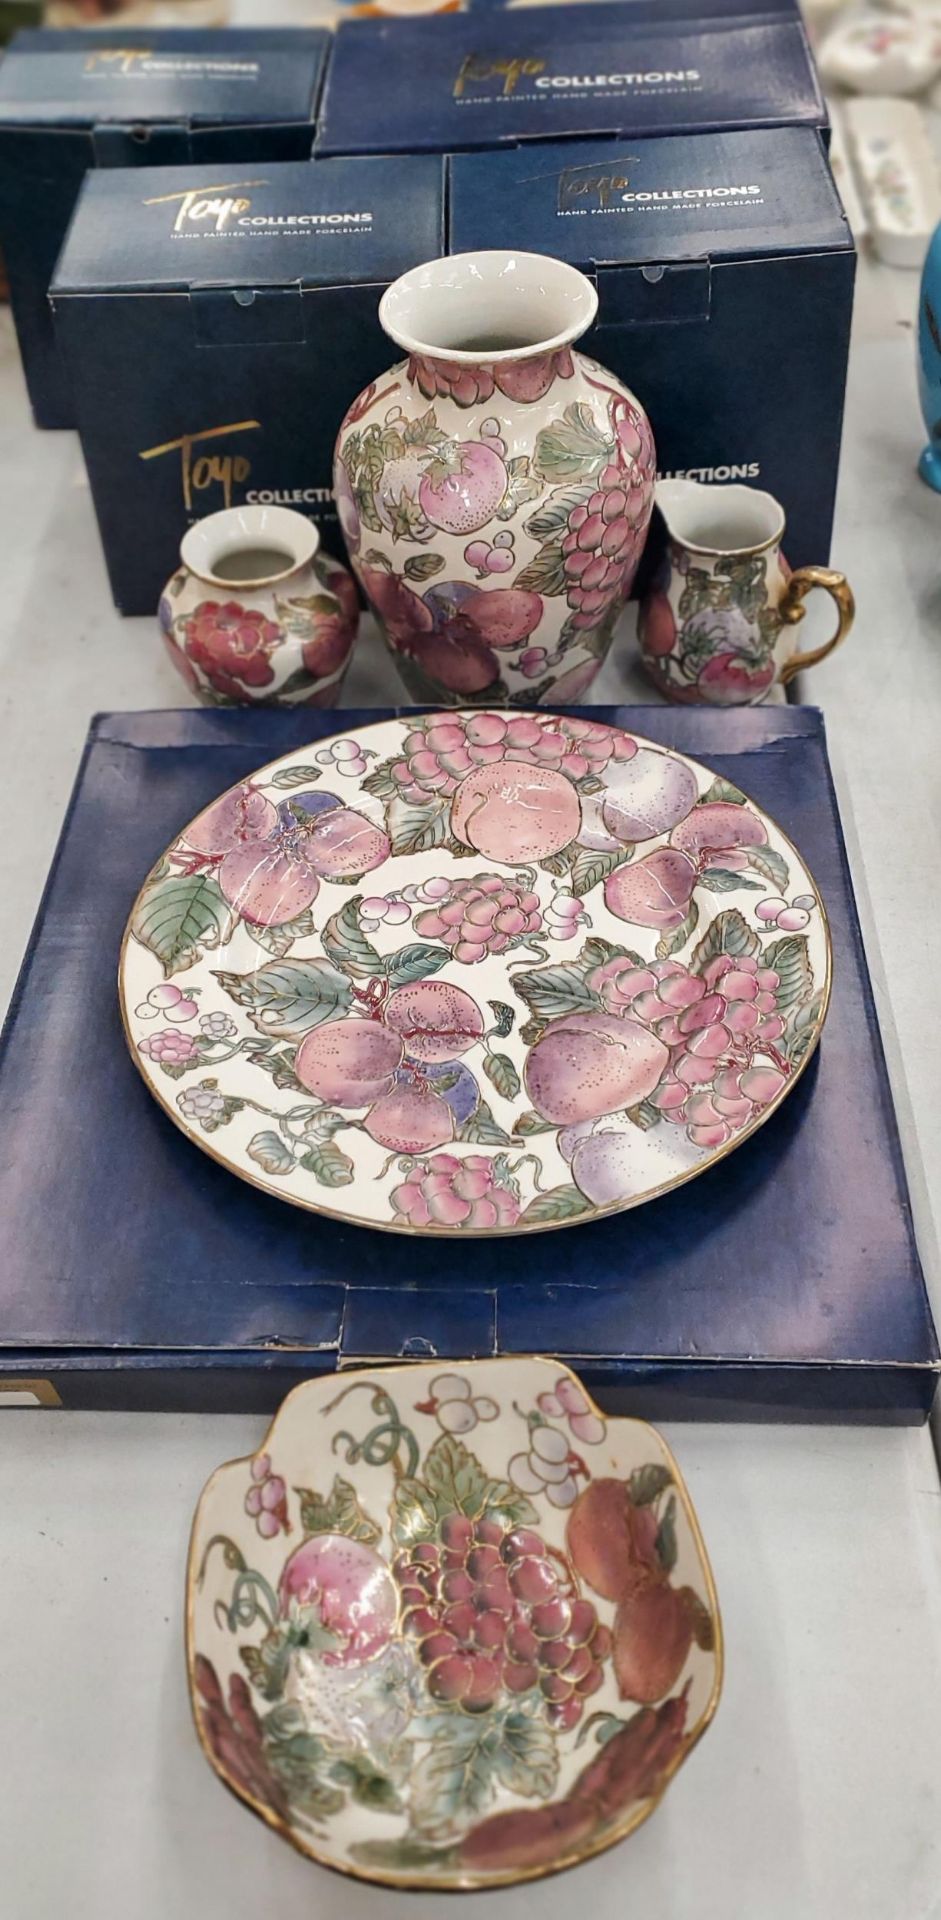 A QUANTITY OF 'TOYO COLLECTIONS' CERAMICS TO INCLUDE A WALL PLATE, VASES, A JUG AND BOWL, ALL